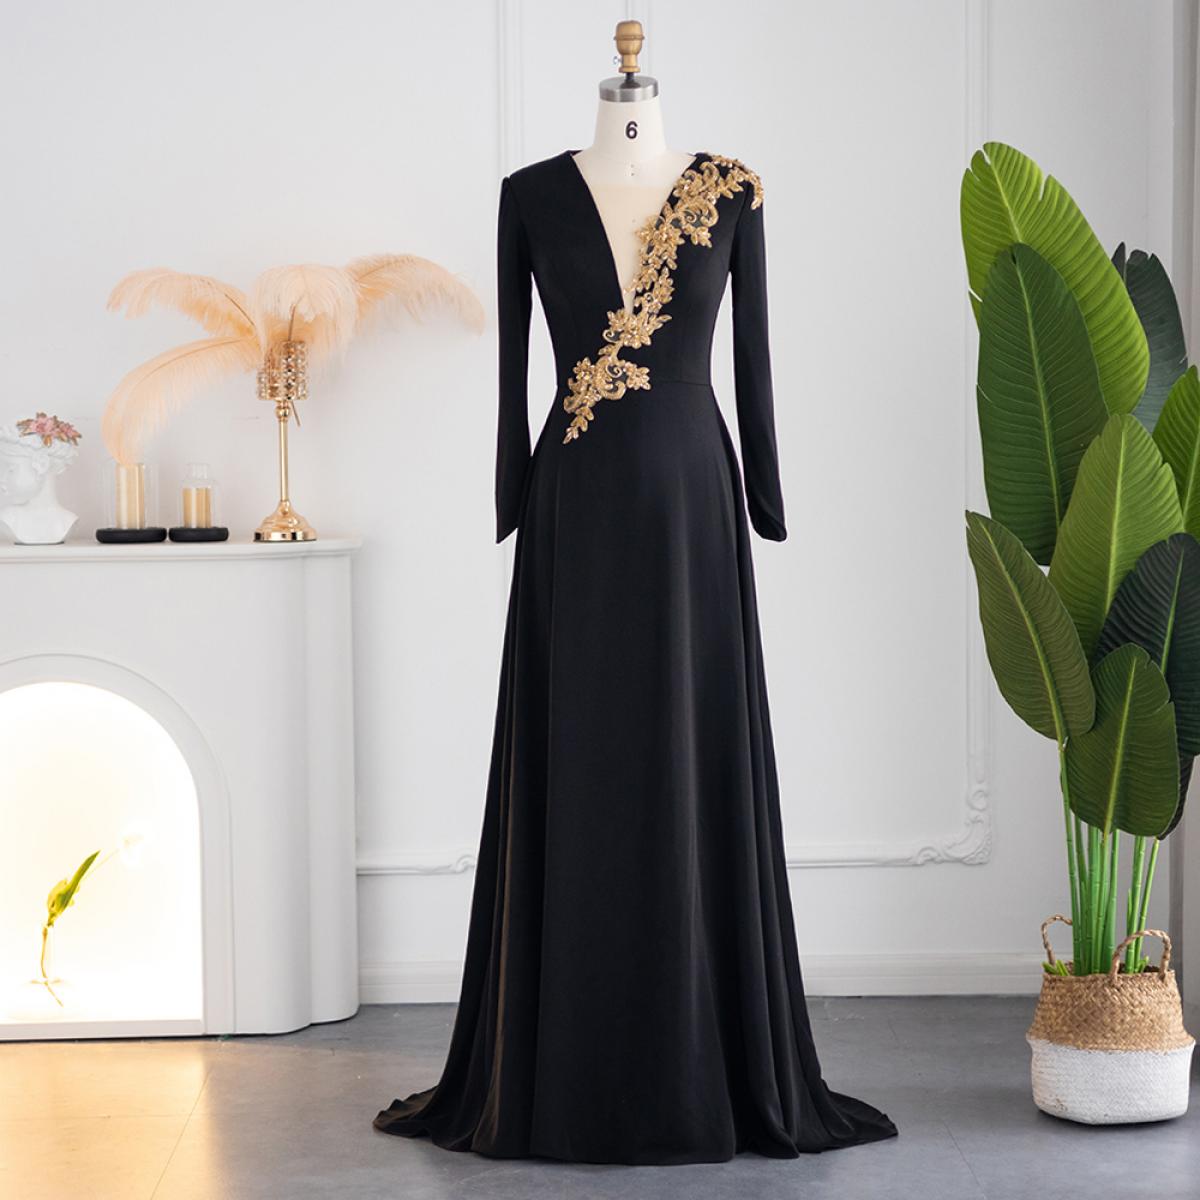 WYKDD Evening Gowns Appliques Long Sleeve Arabic Formal Gowns High Neck  Dubai Evening Dresses With Train (Color : D, Size : 18W) : Amazon.sg:  Fashion